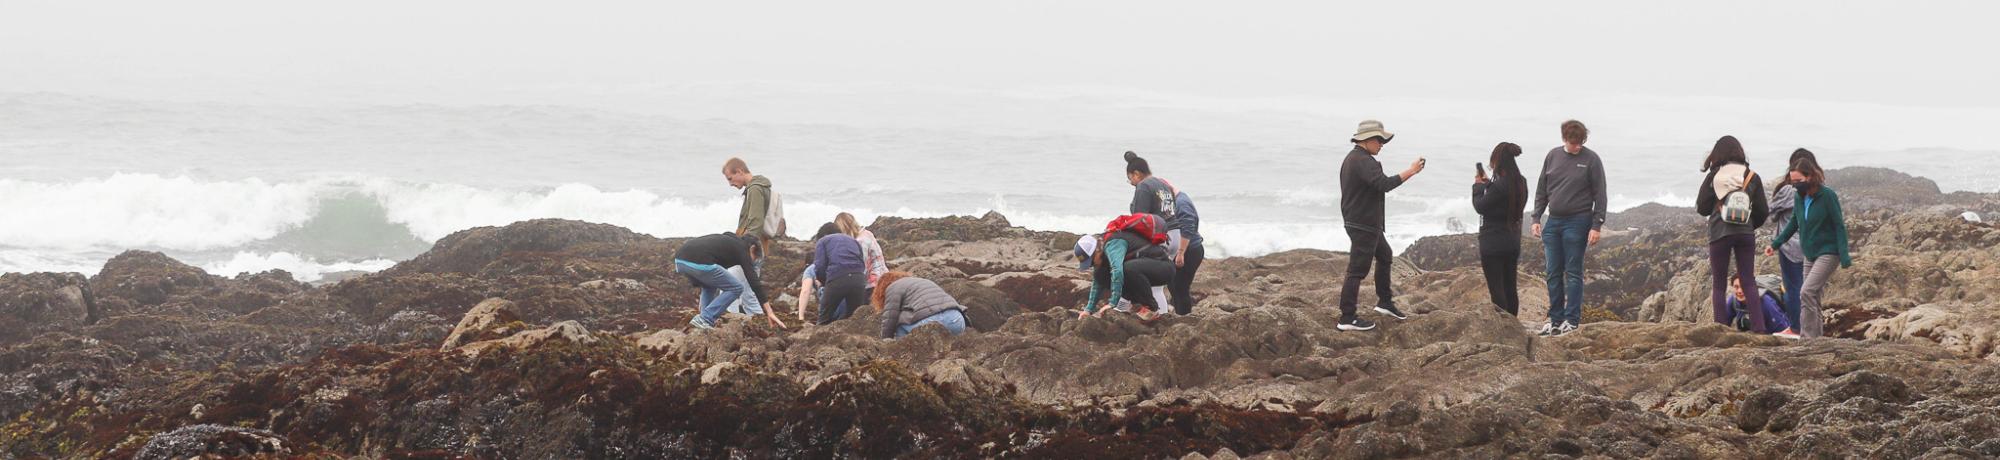 A group of students scattered across a coastal bluff, many reaching down to look at marine organisms on the rocks.